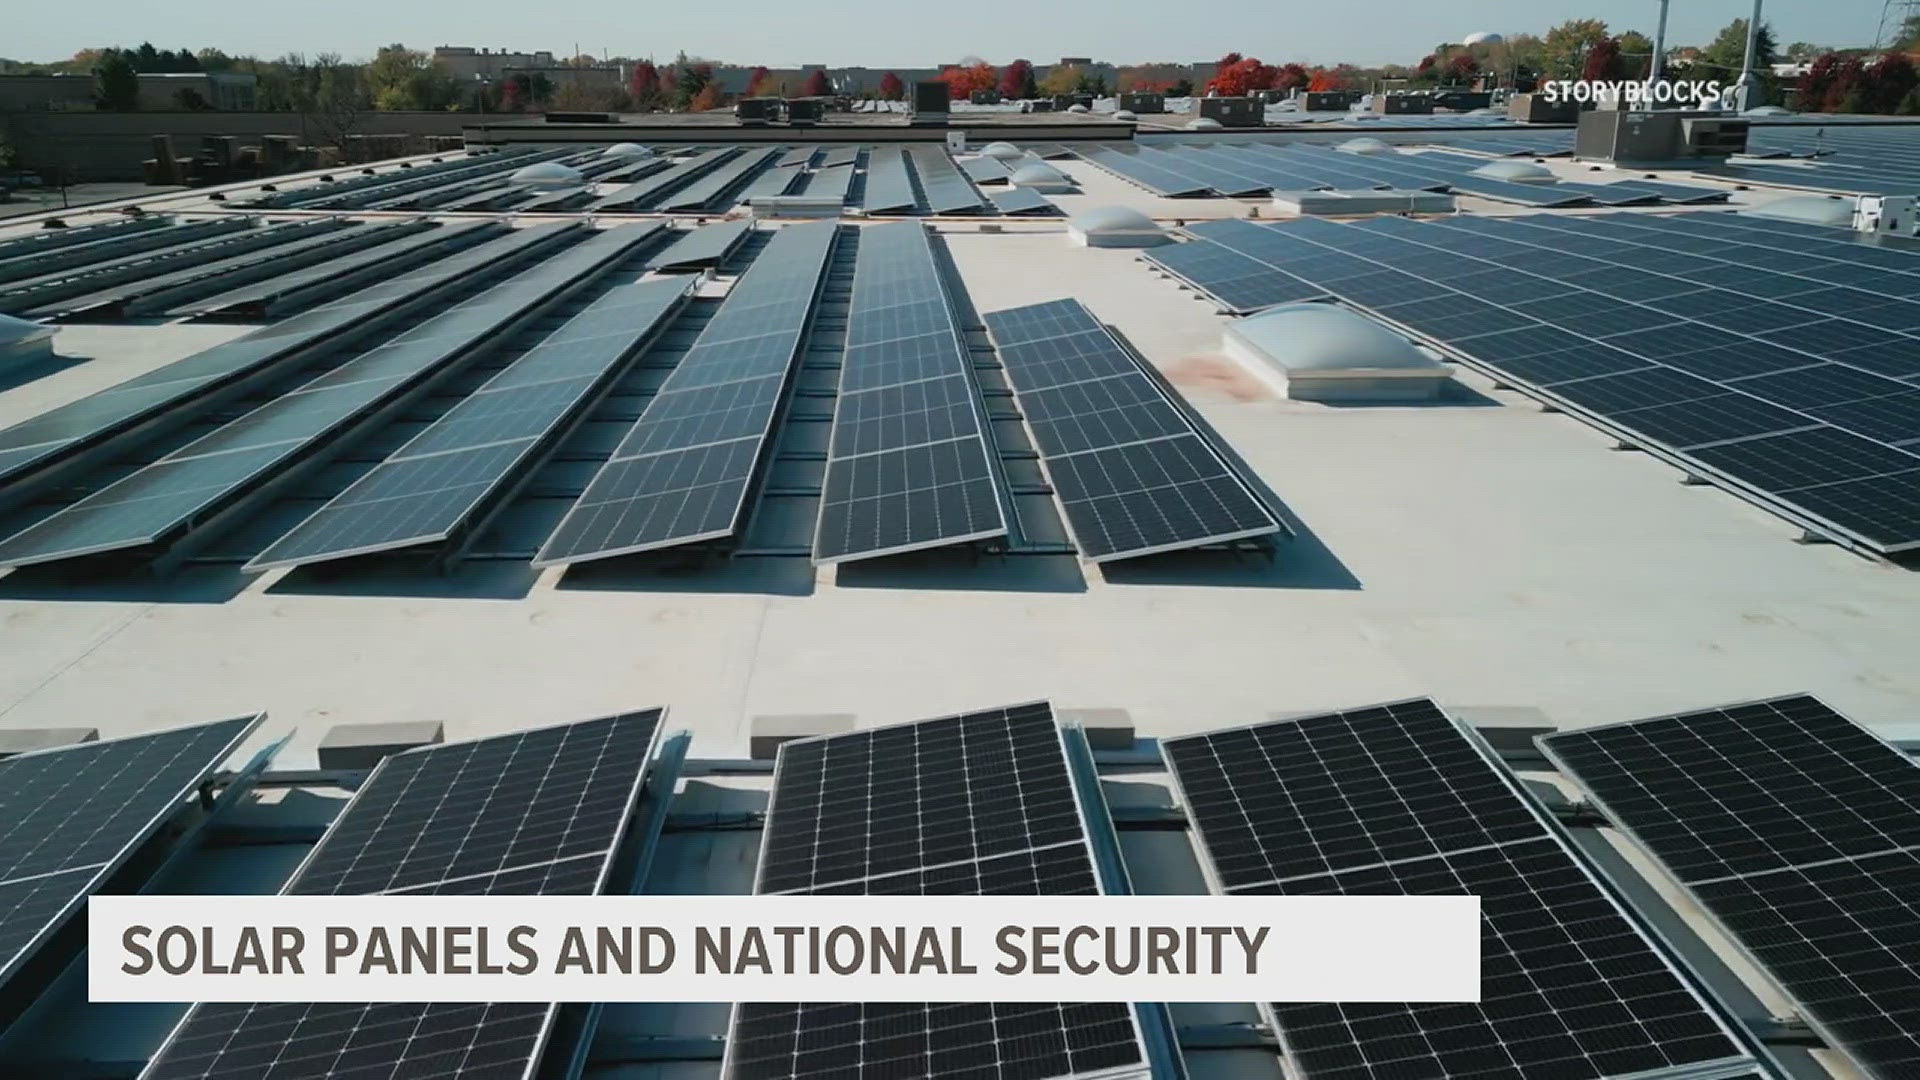 After China flooded the market in recent years, some government officials are concerned certain solar panels may pose security concerns.